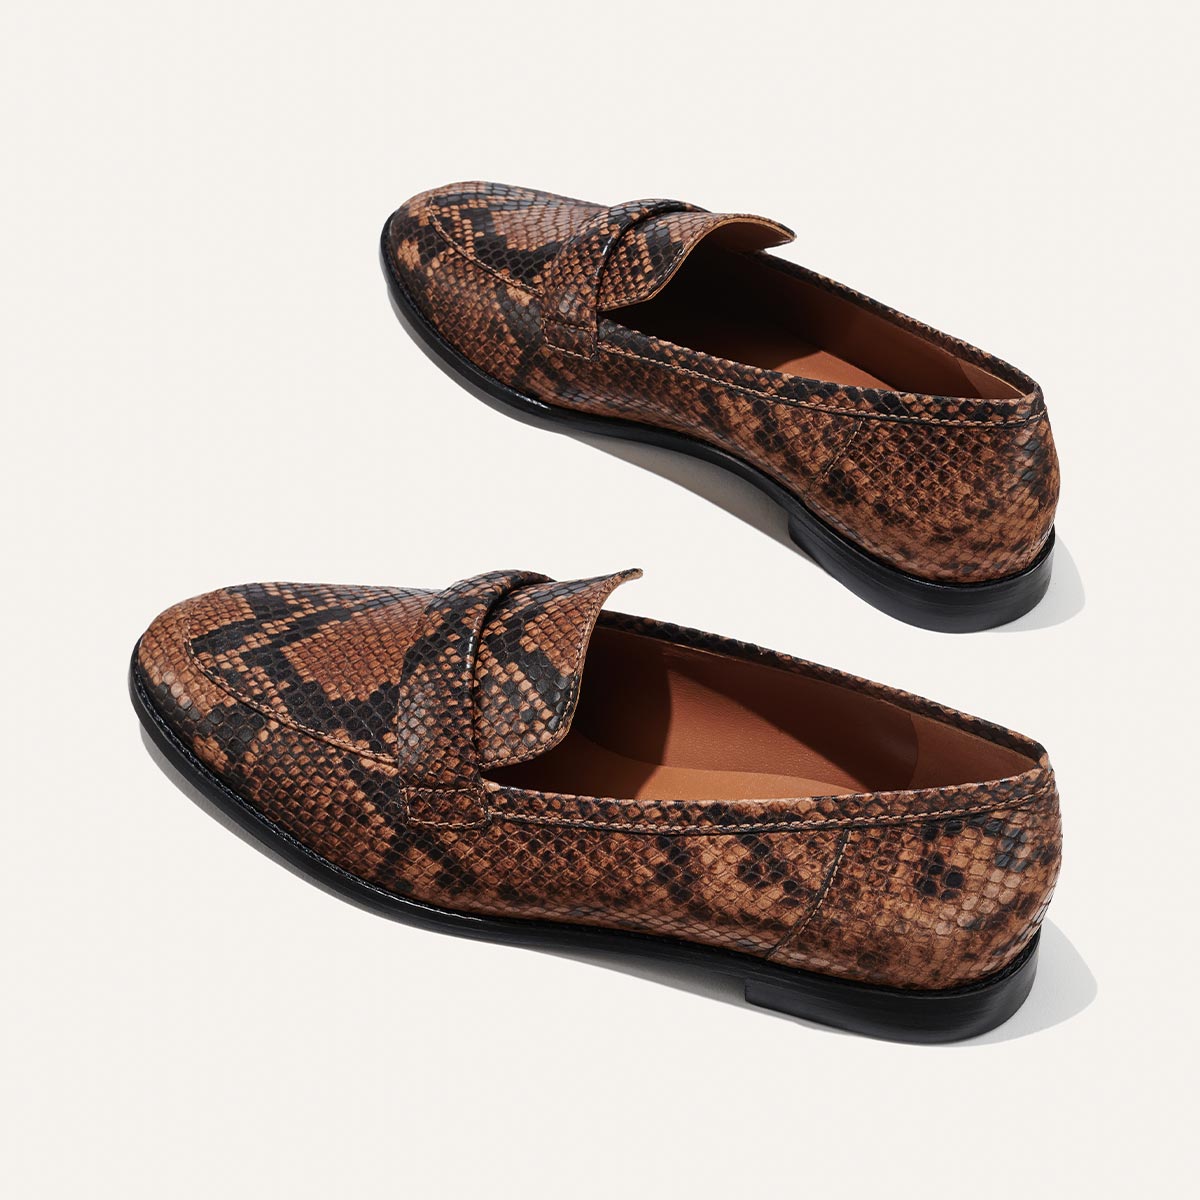 The Andie Loafer - Espresso Python Embossed